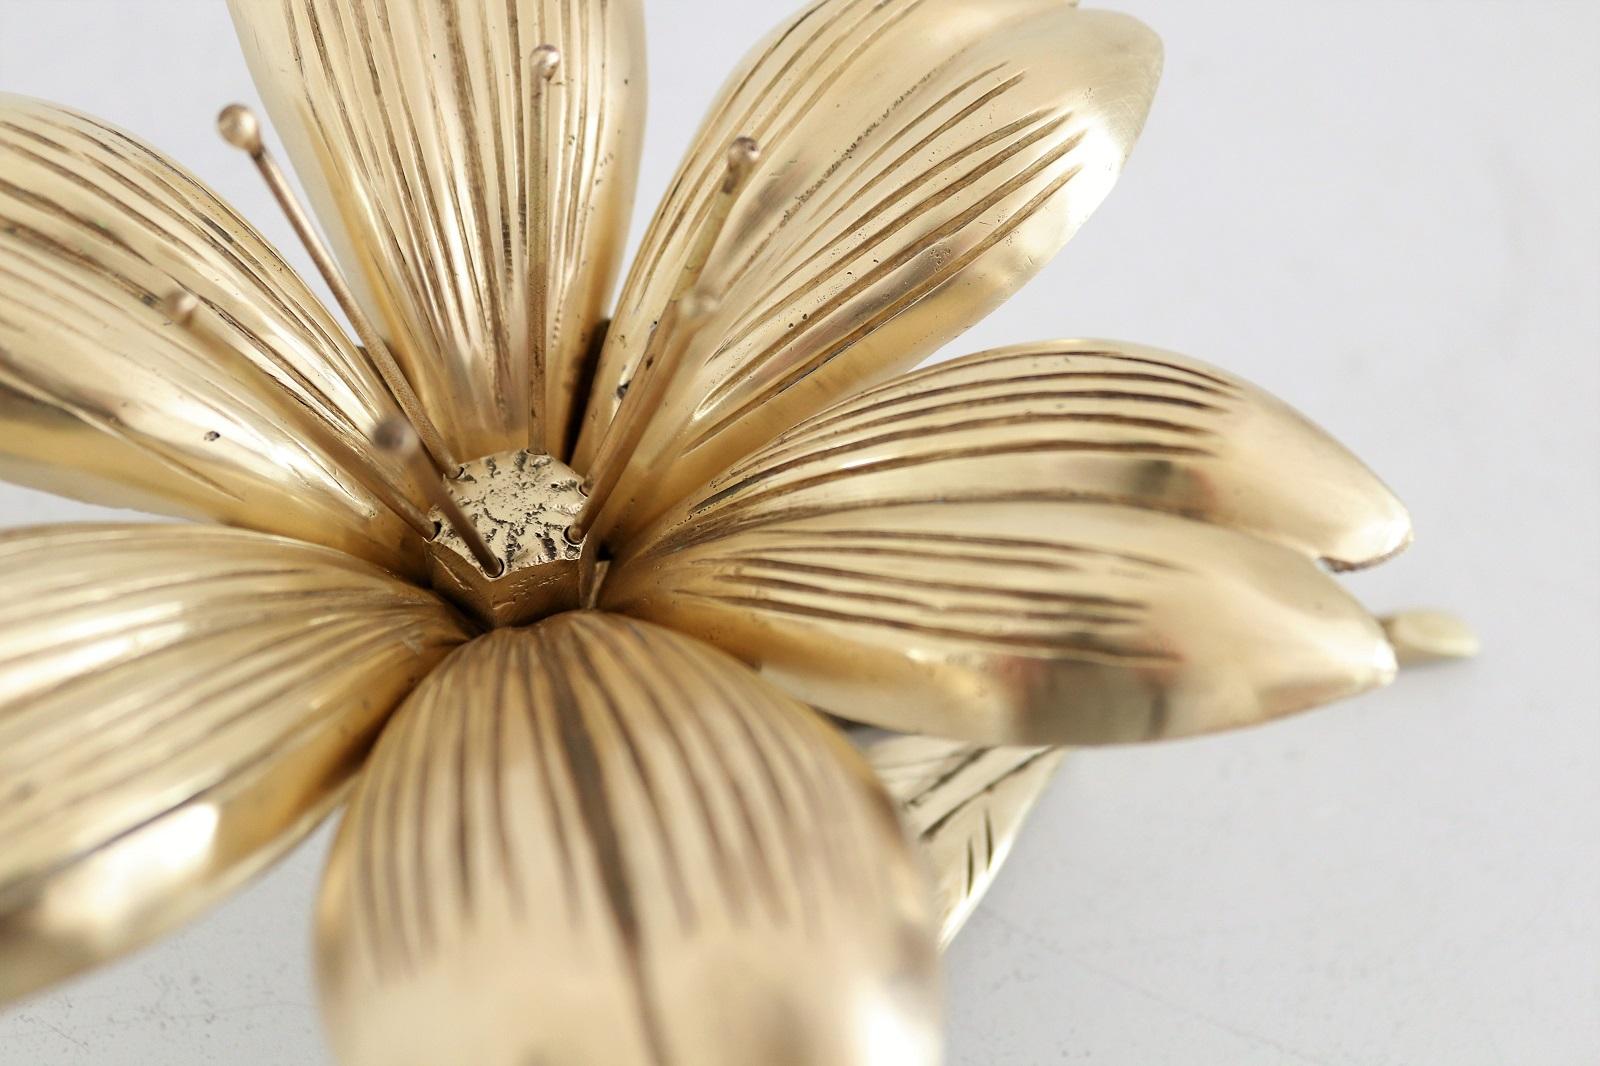 Italian Midcentury Flower in Brass with Petal Ashtrays for Cigarettes, 1950s 6